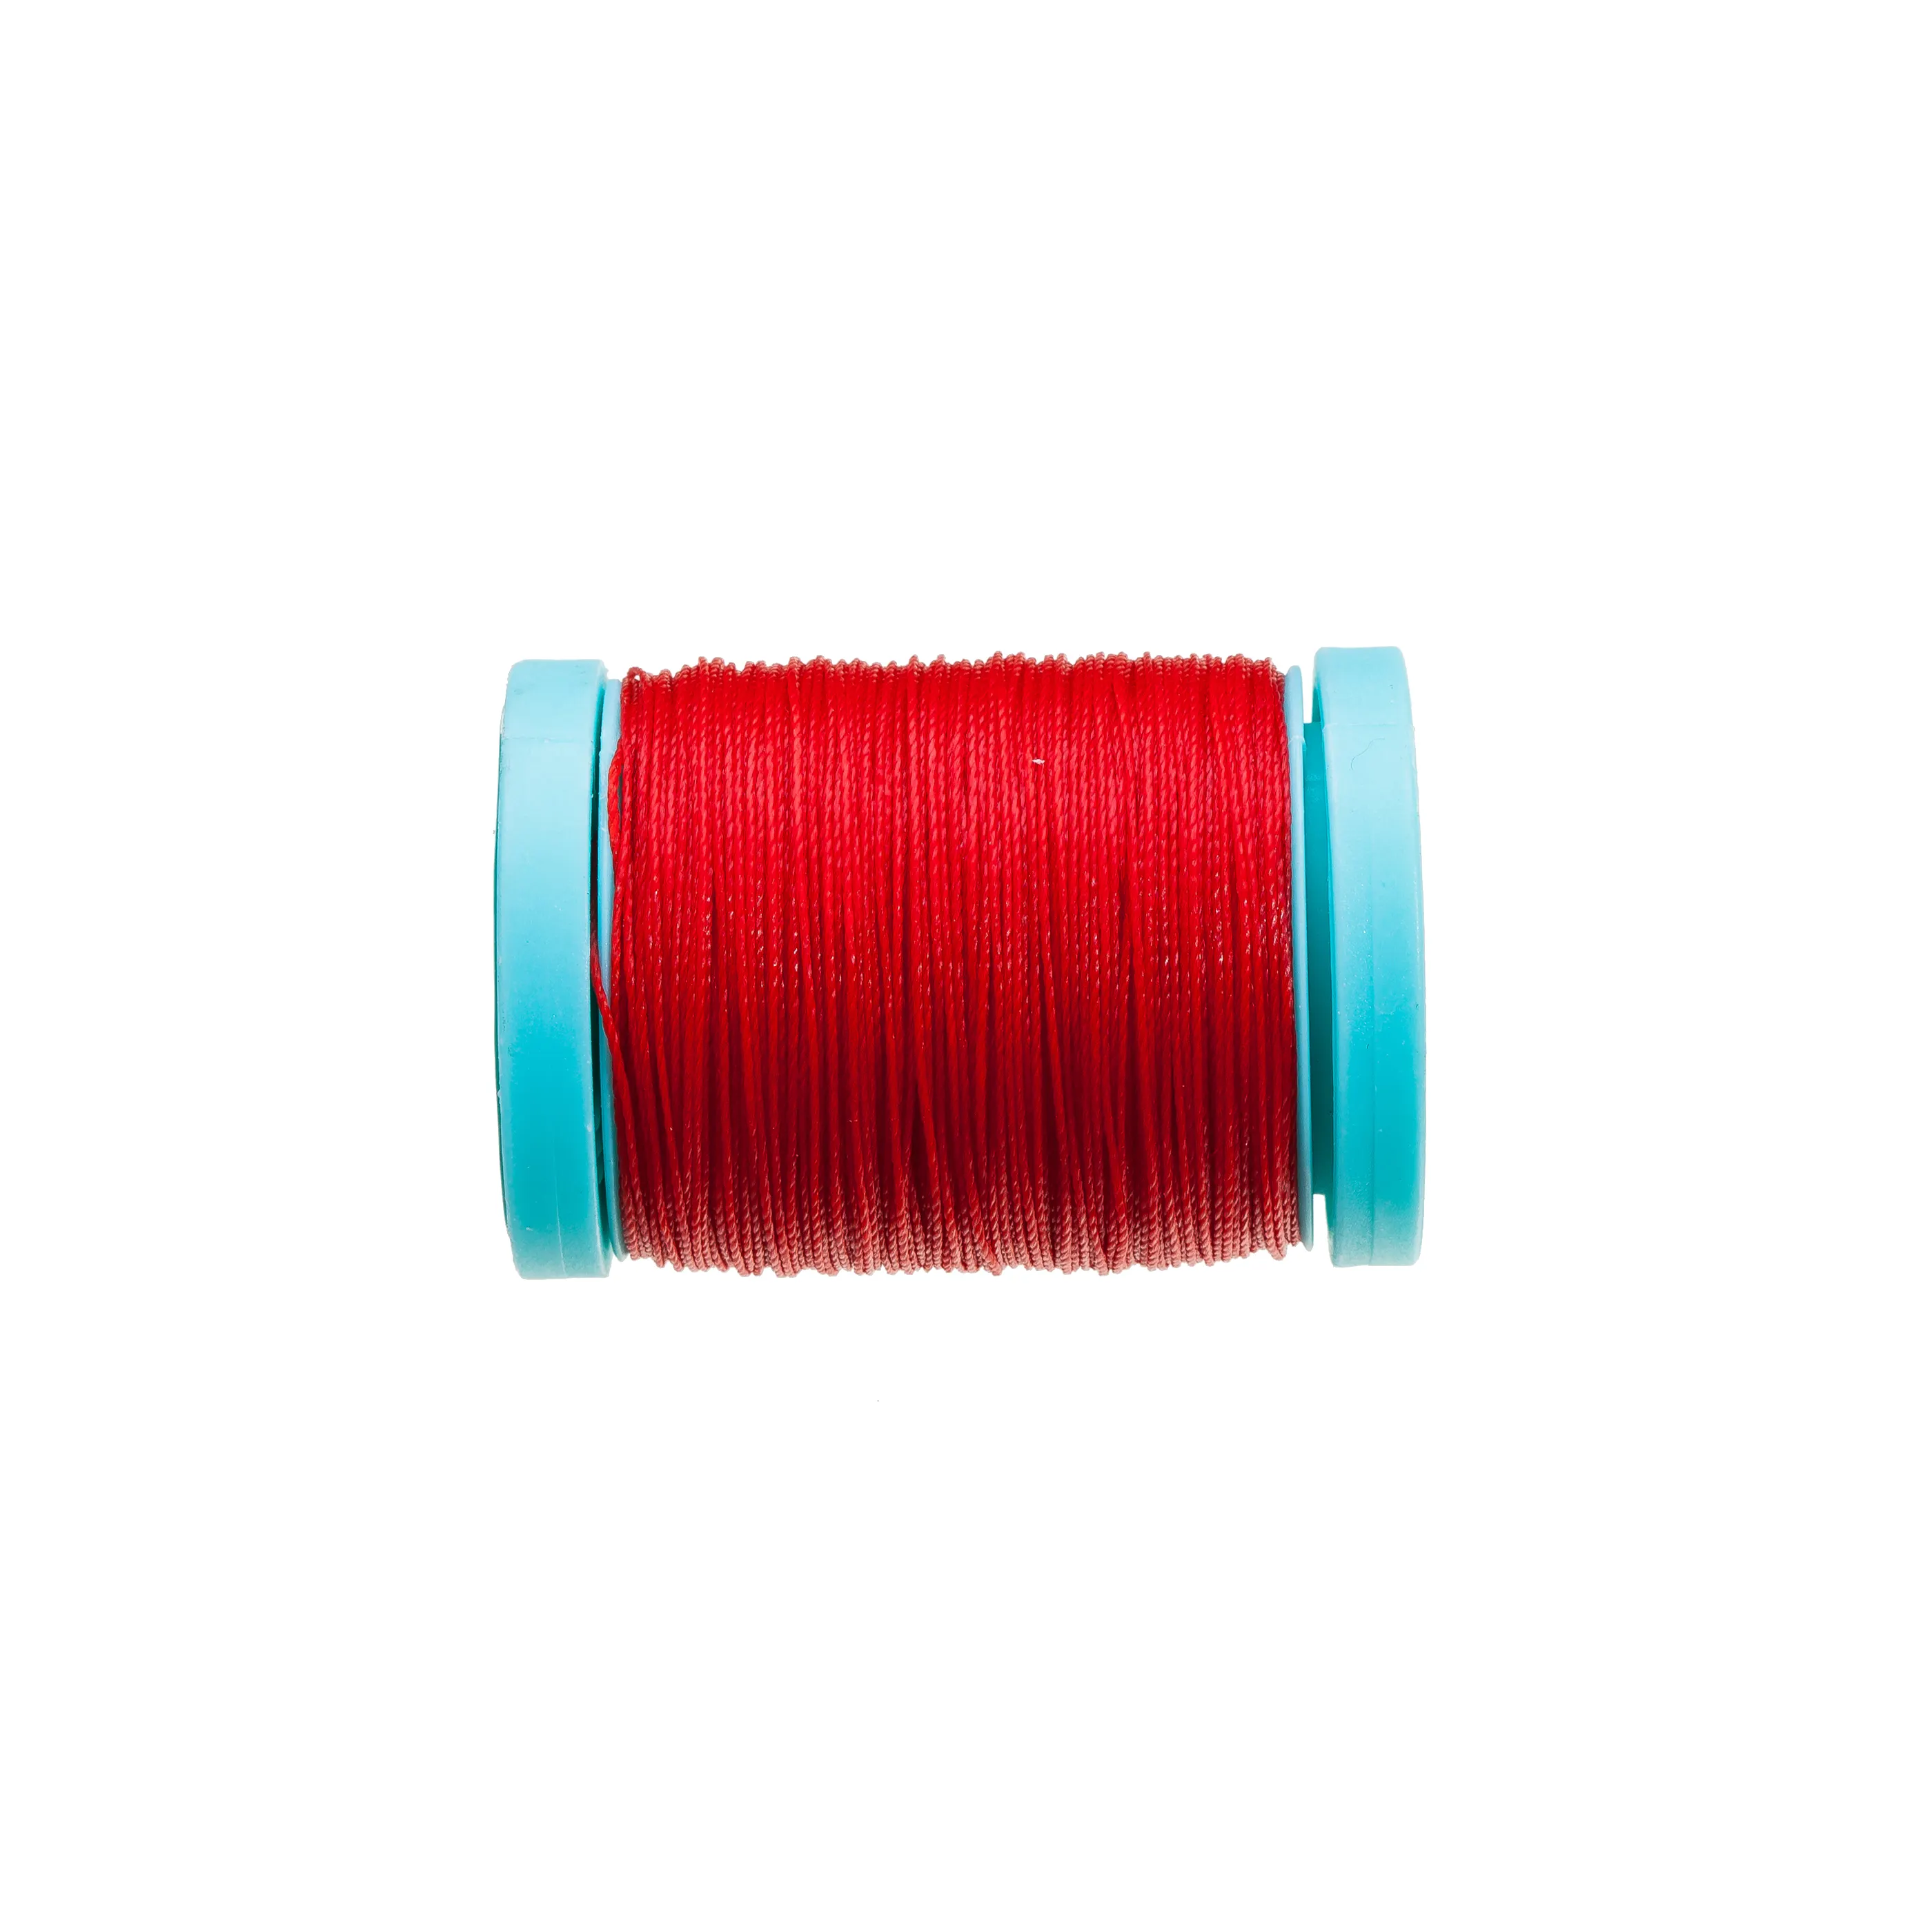 JR High Quality 0.4mm polyester round waxed thread for Macrame, Knotting String, Leather Sewing DIY Crafts"